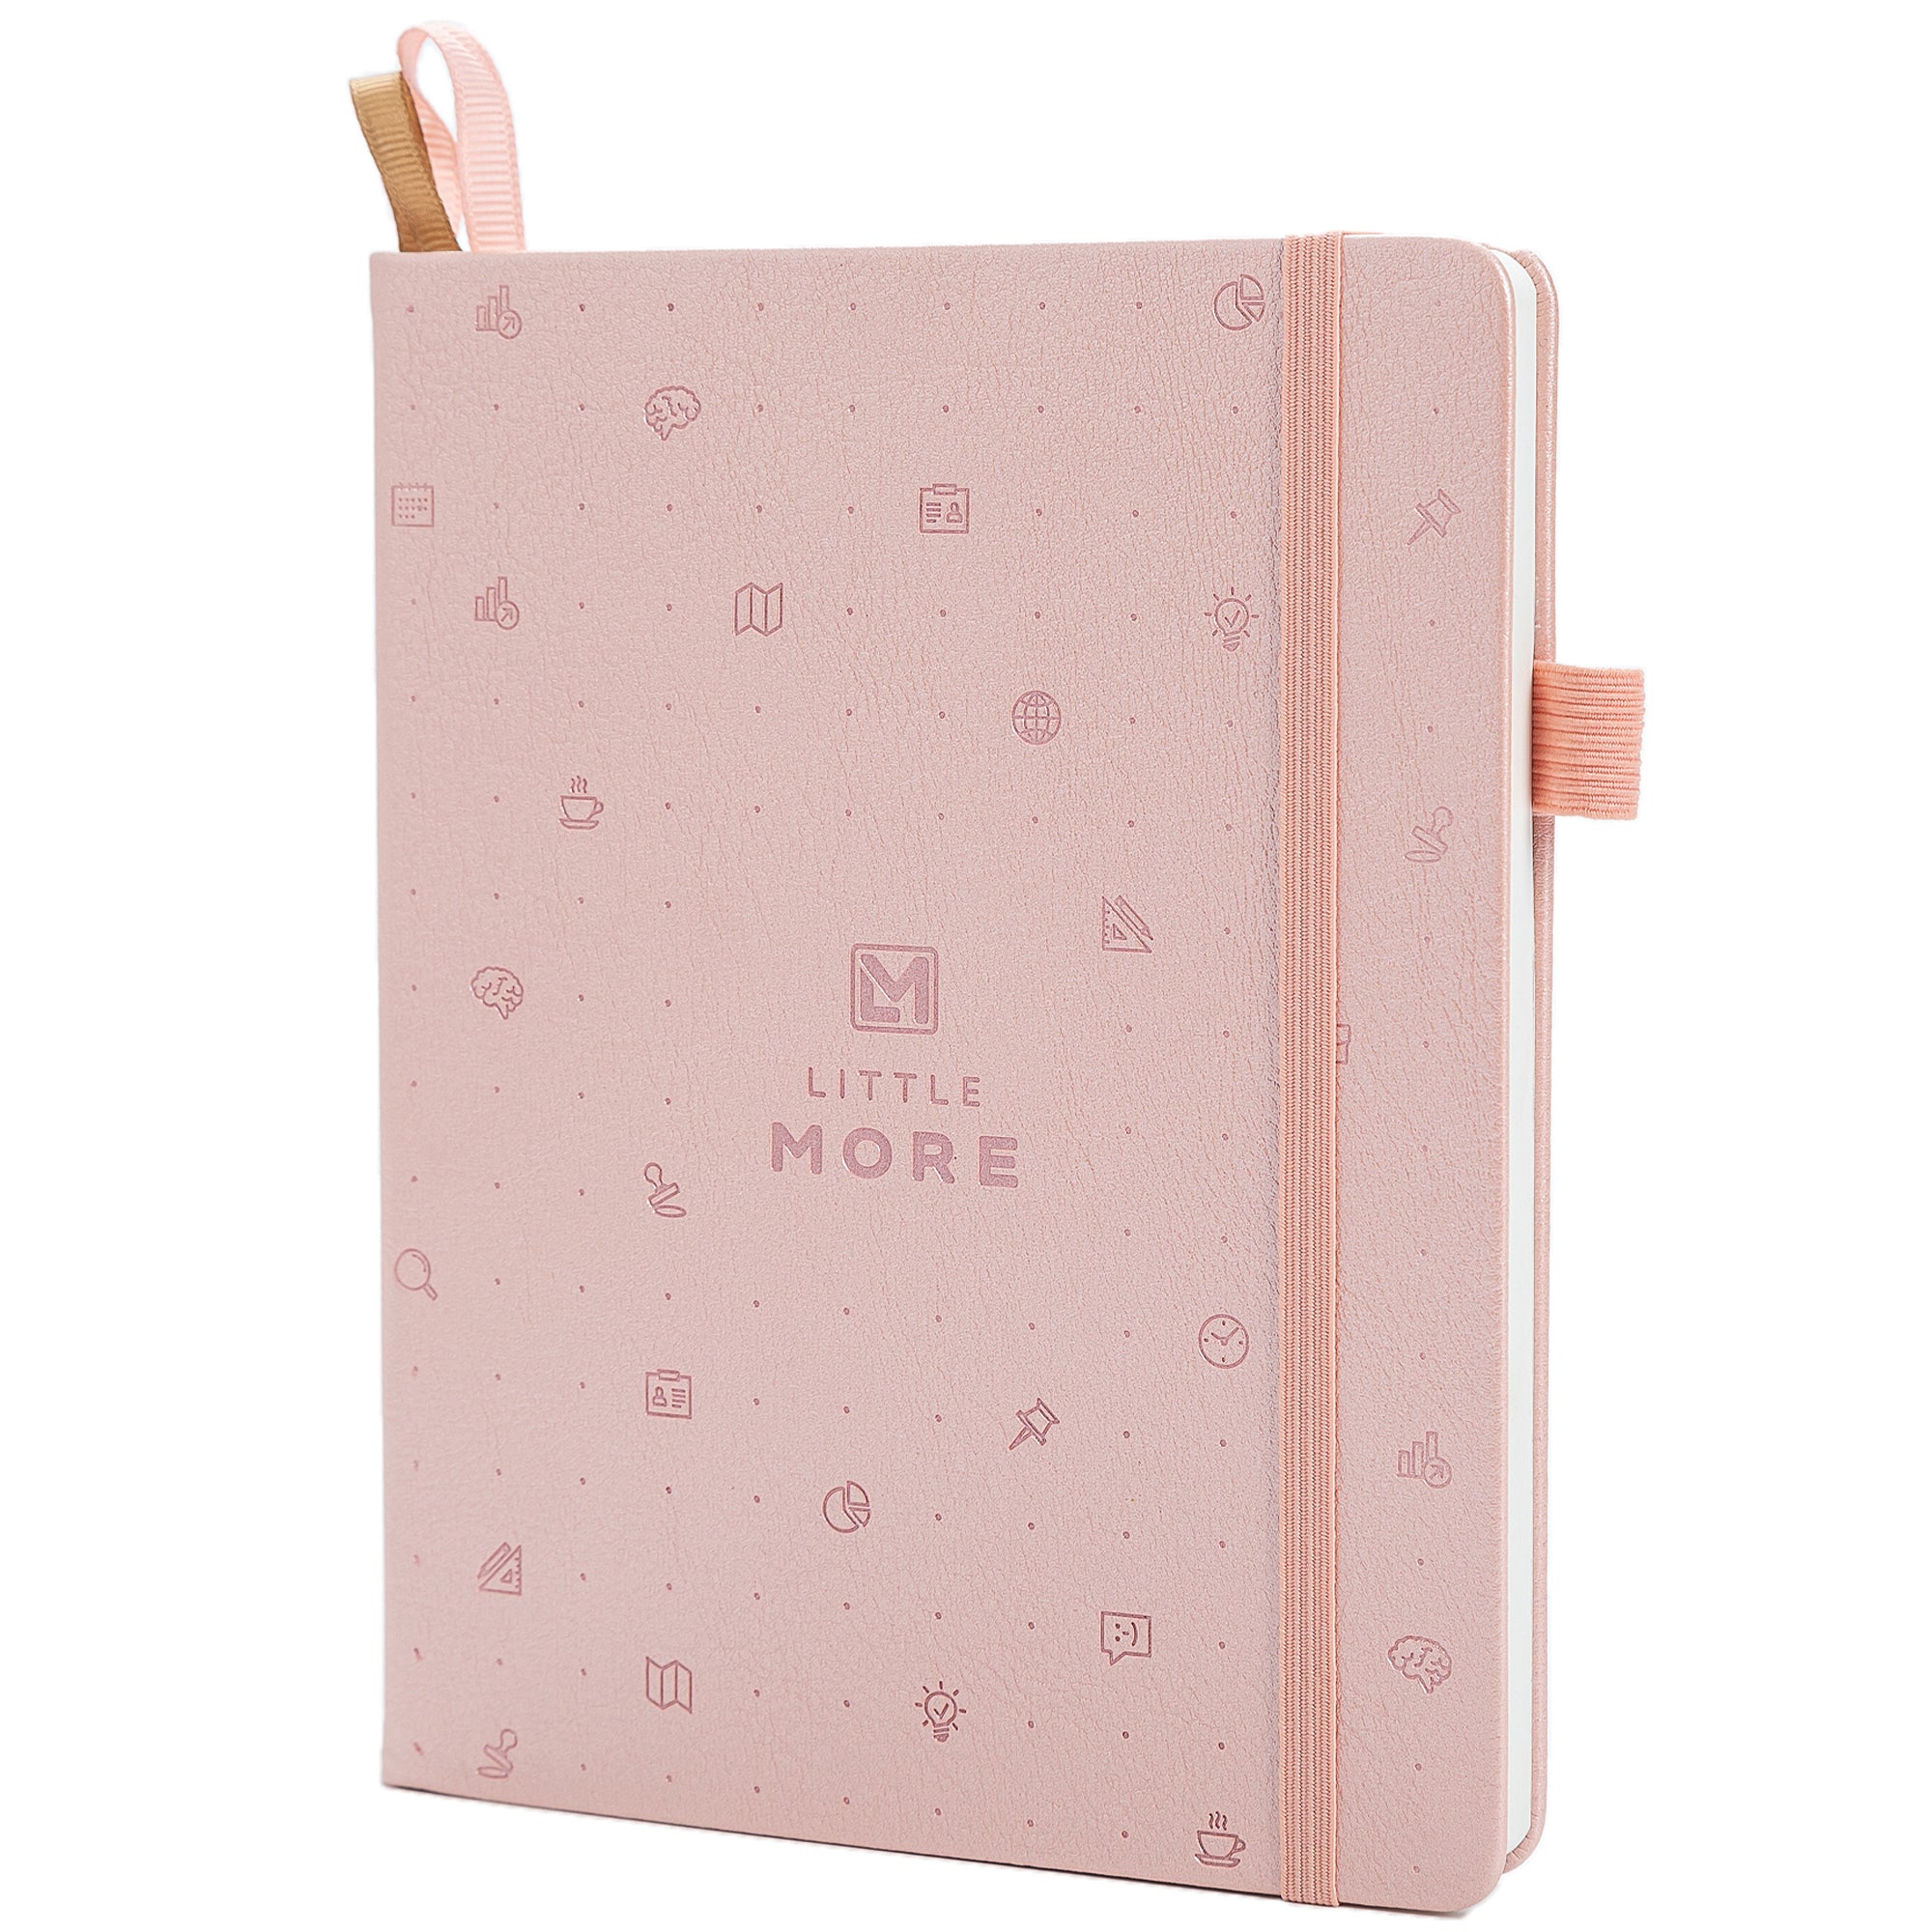 Little More Premium Dotted Journal - with Perforated Pages - Rose Gold, Size: 7 x 5.5